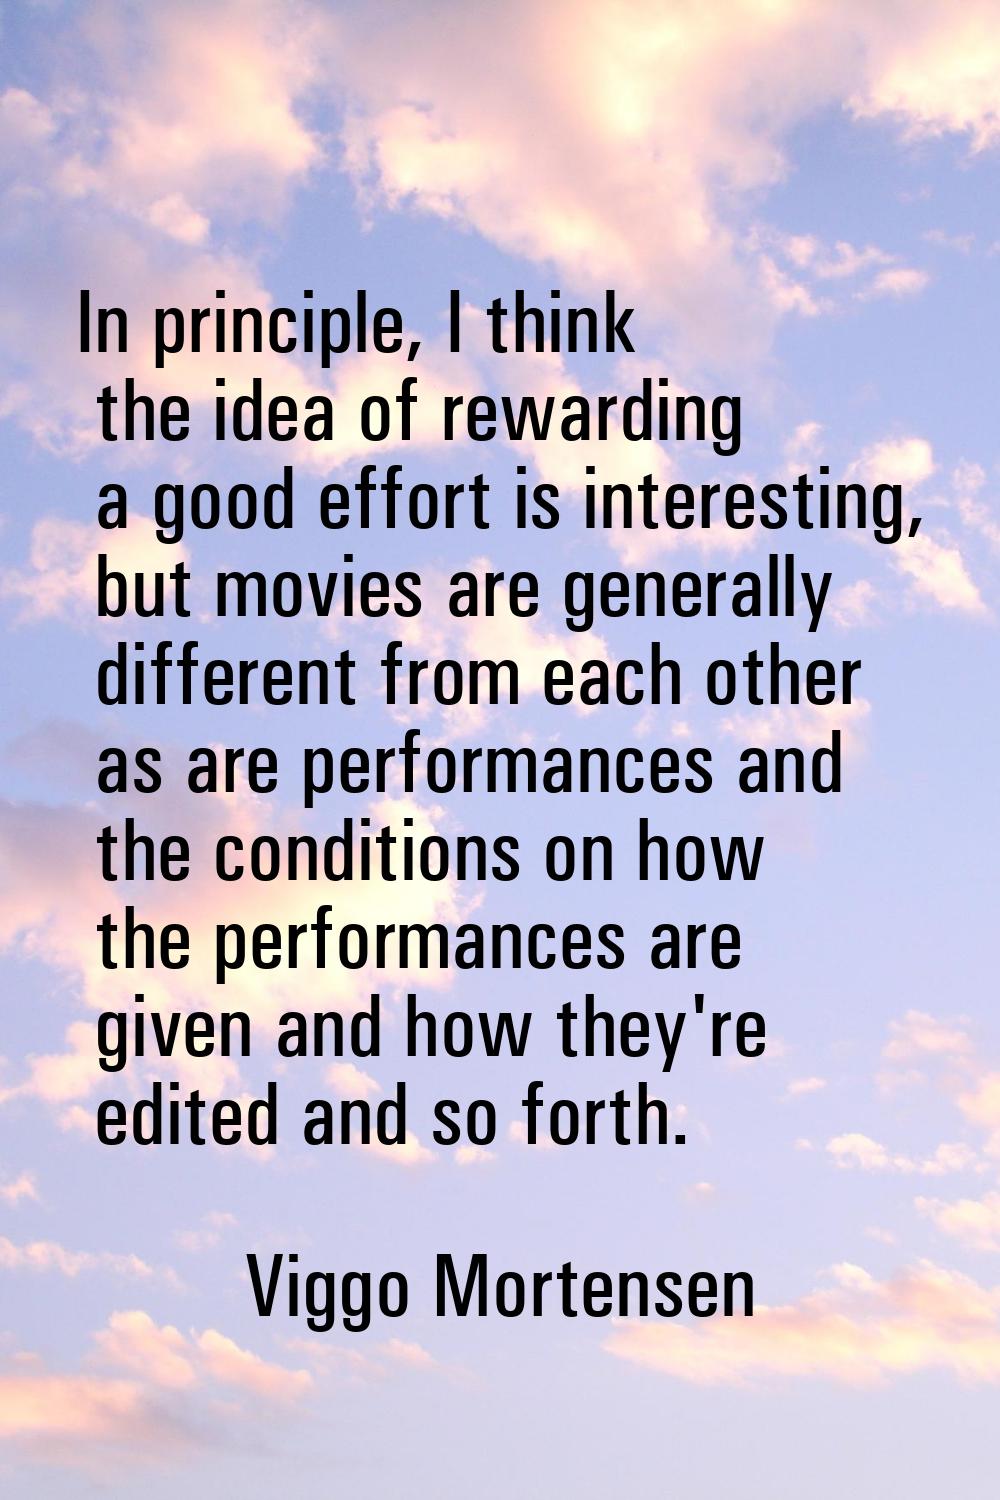 In principle, I think the idea of rewarding a good effort is interesting, but movies are generally 